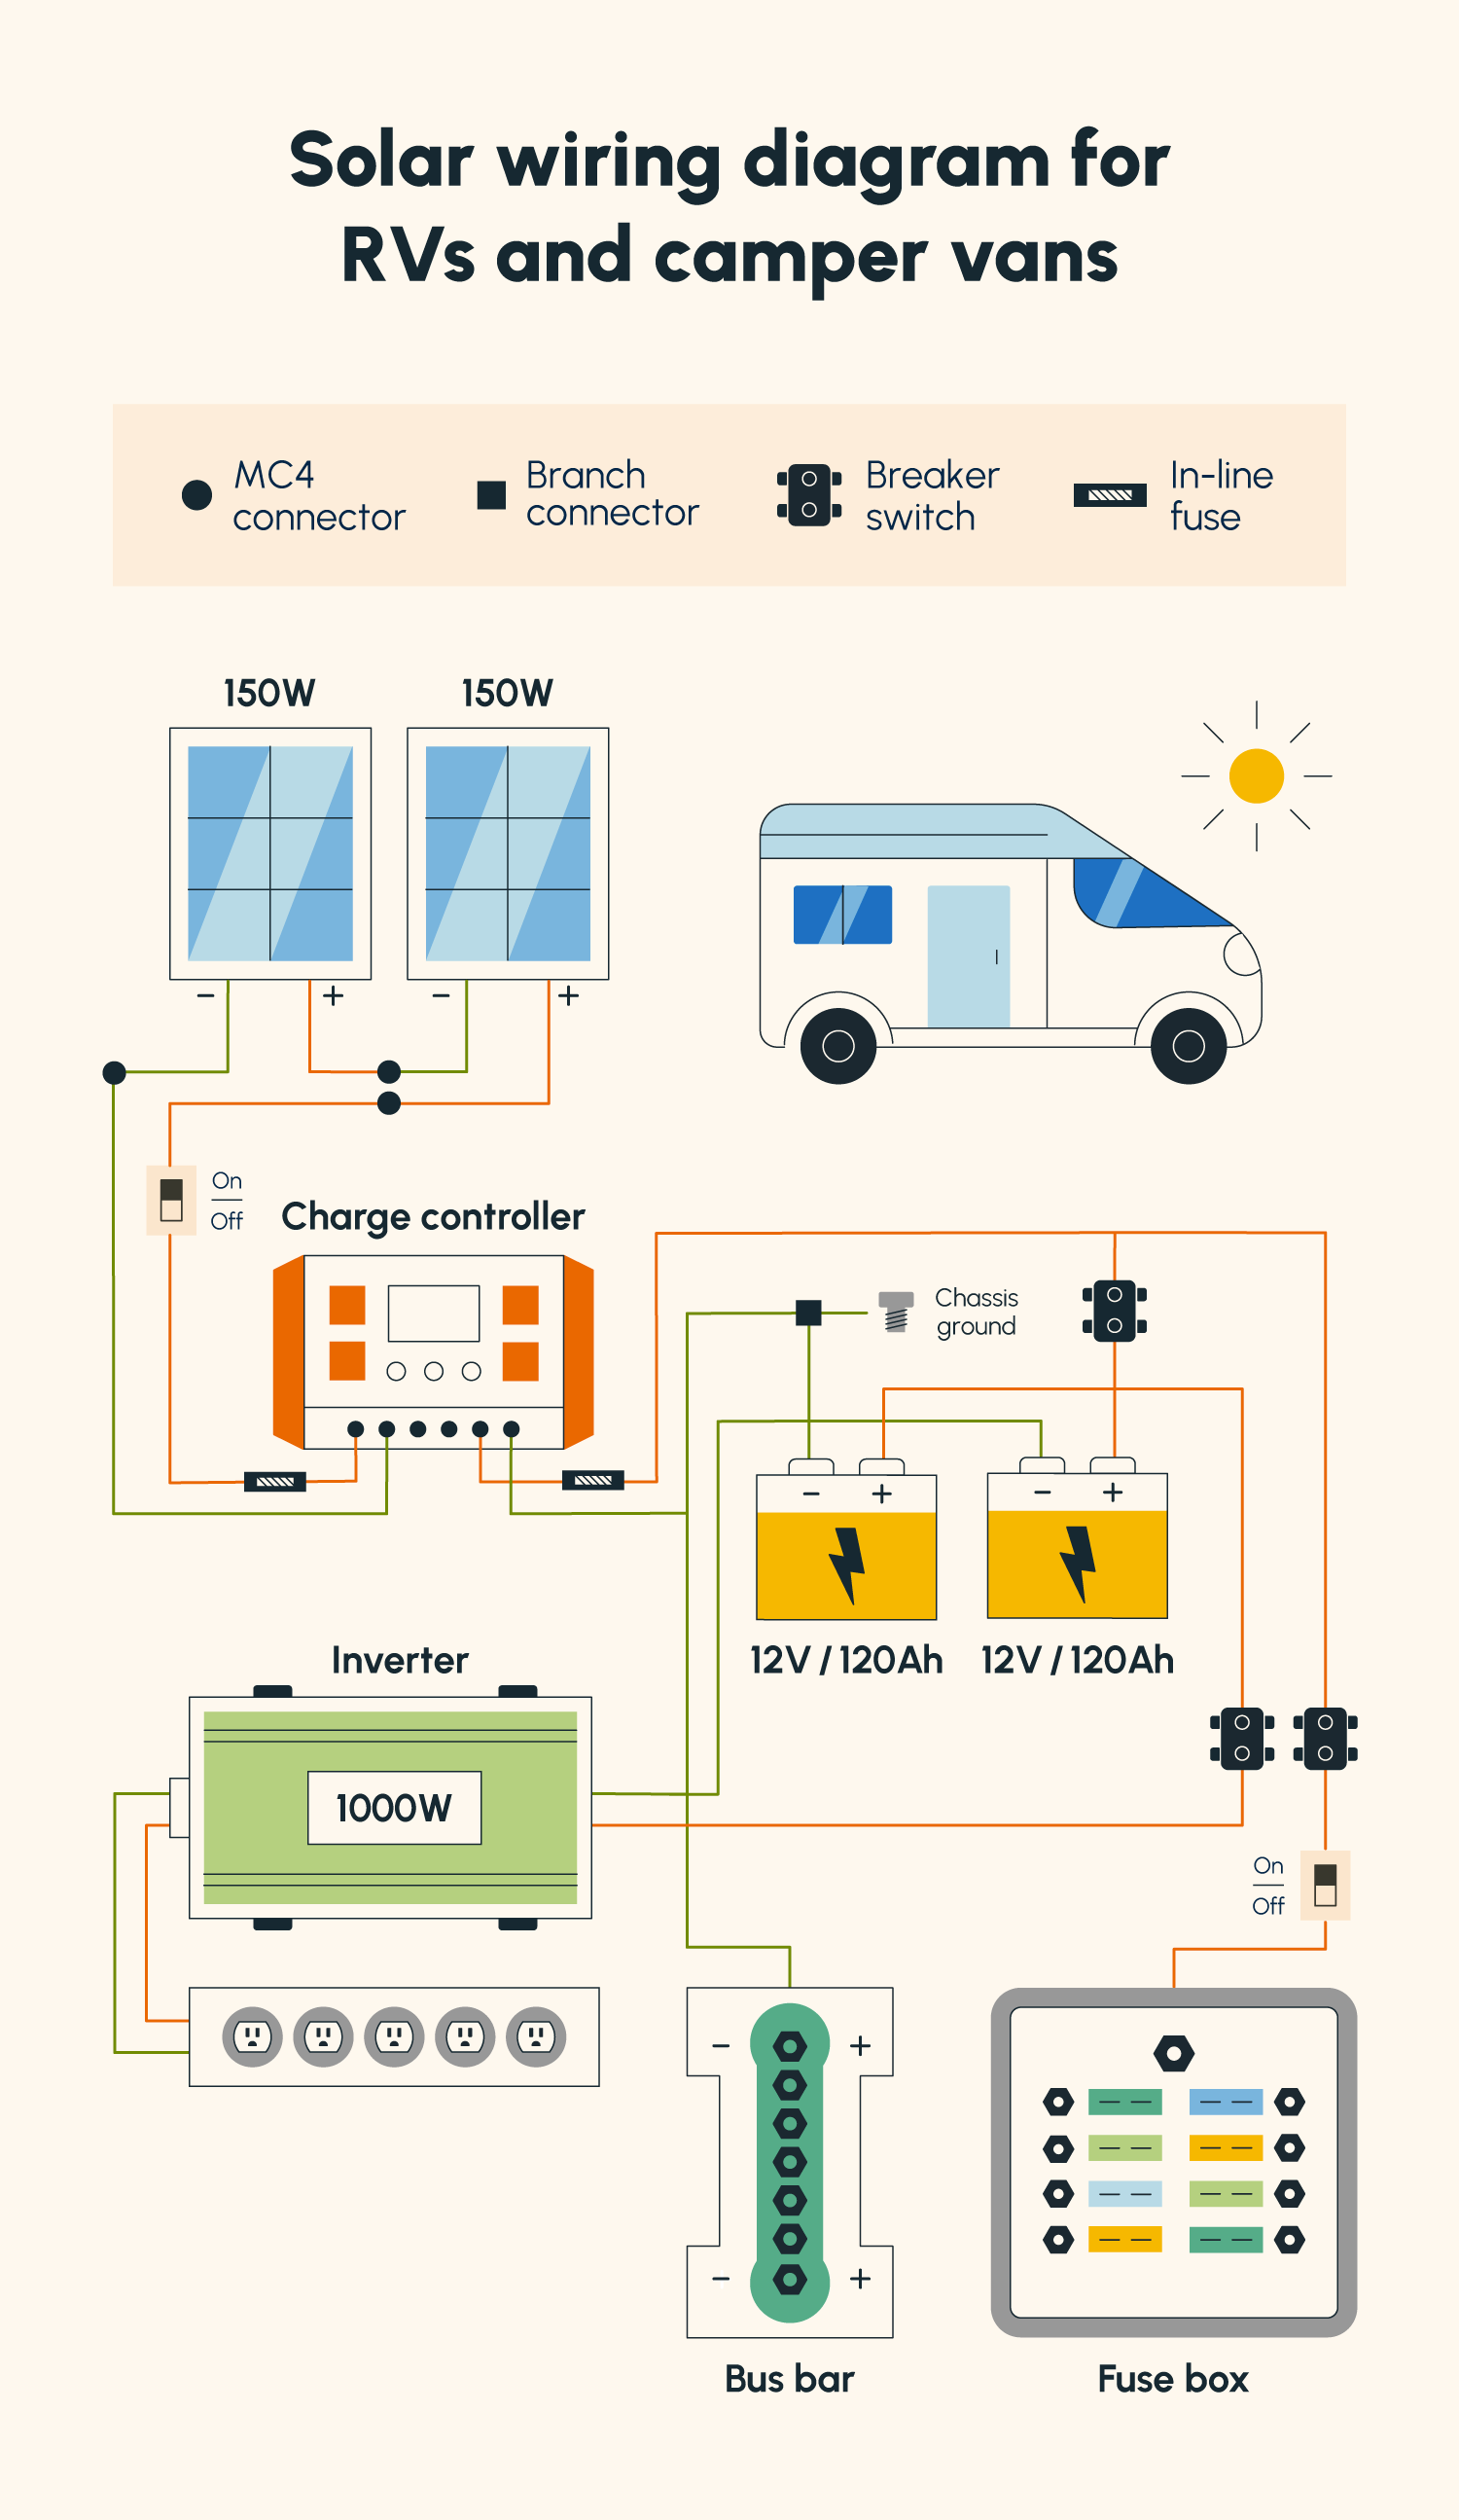 An illustrated solar panel wiring diagram for an RV or camper van setup